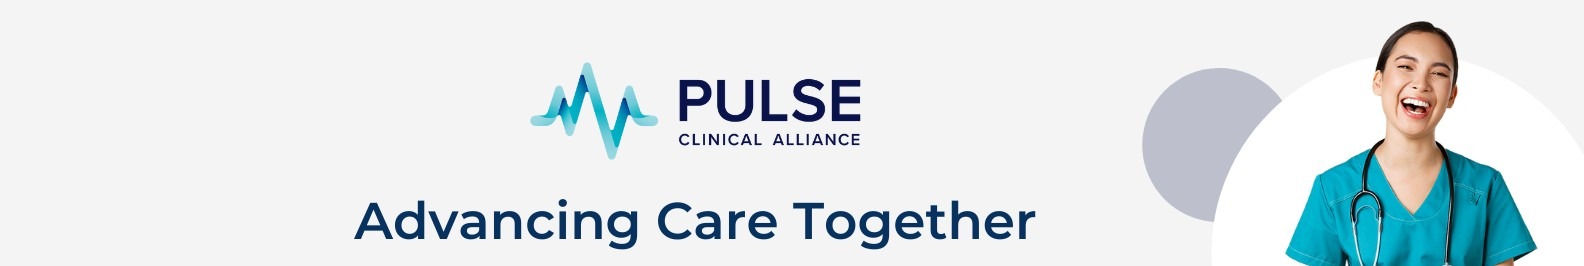 Pulse Clinical Alliance background